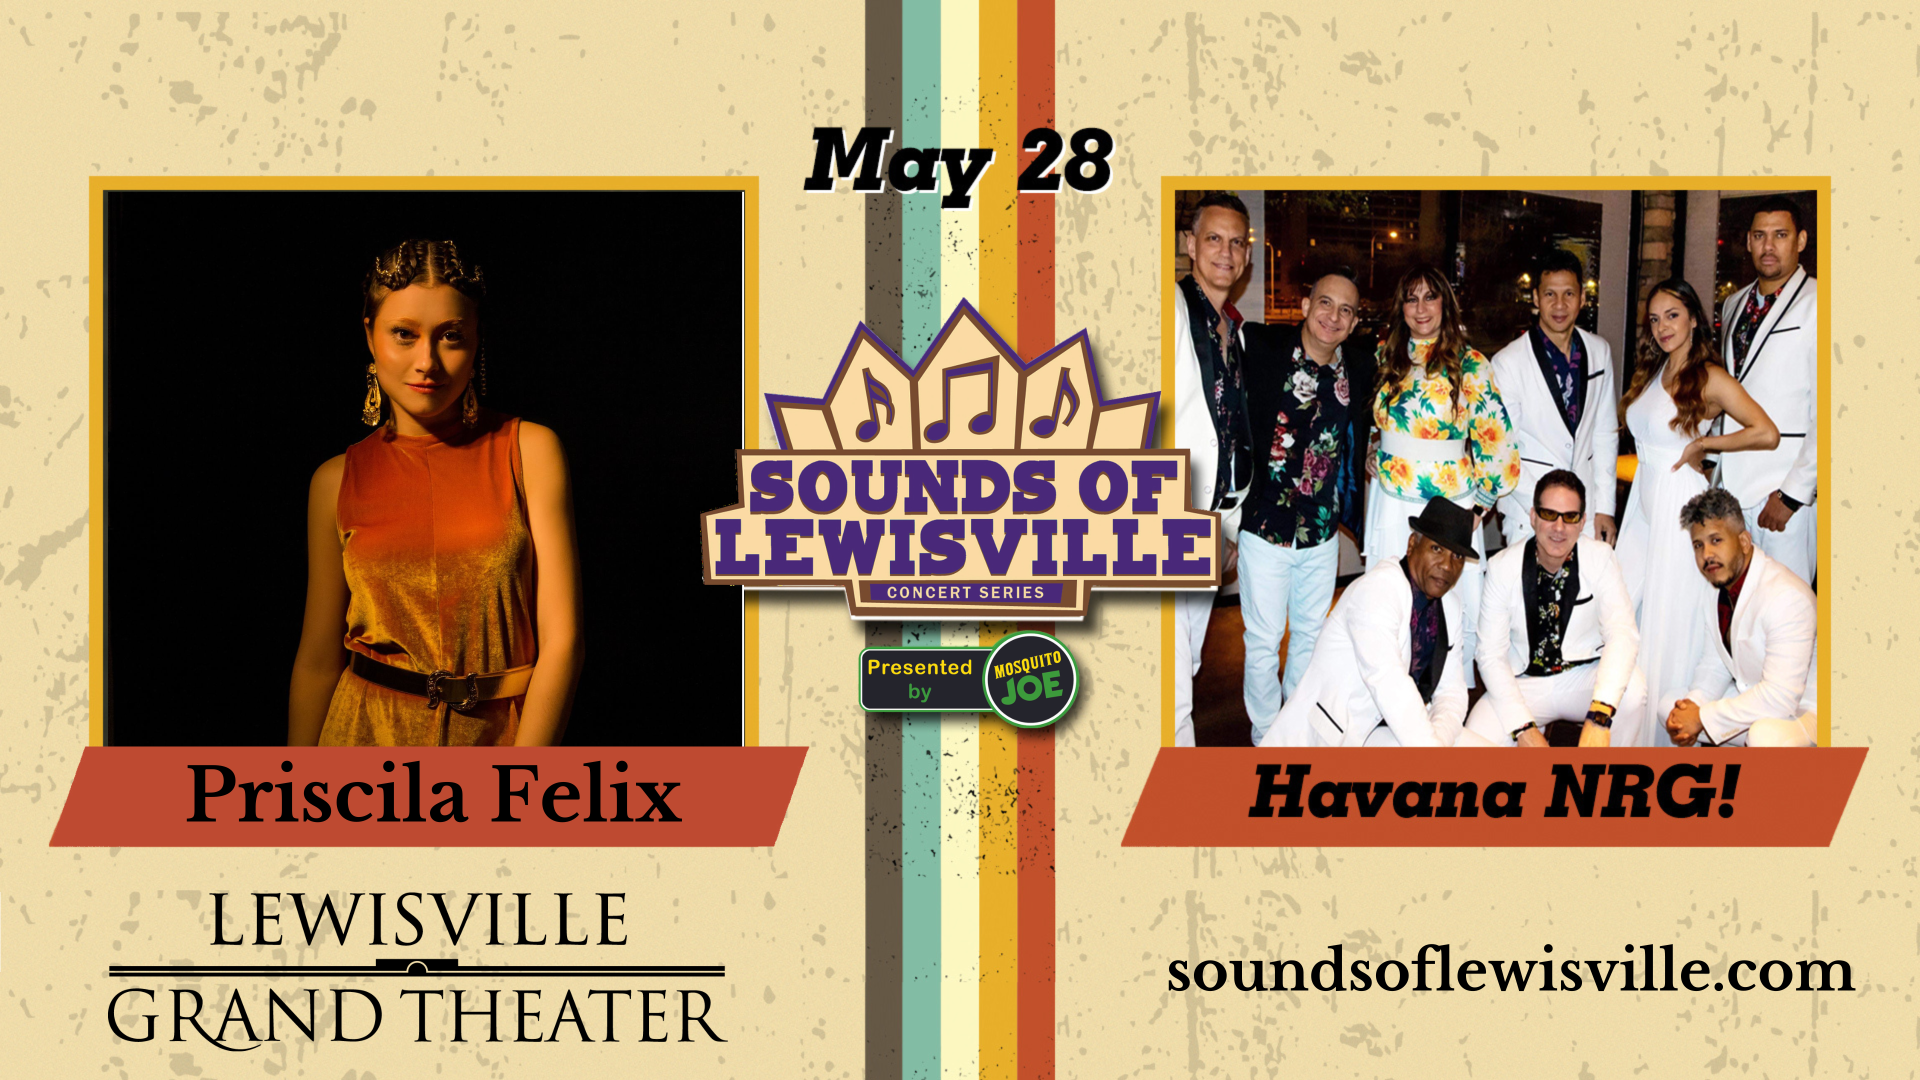 Sounds of Lewisville - May 28 concert